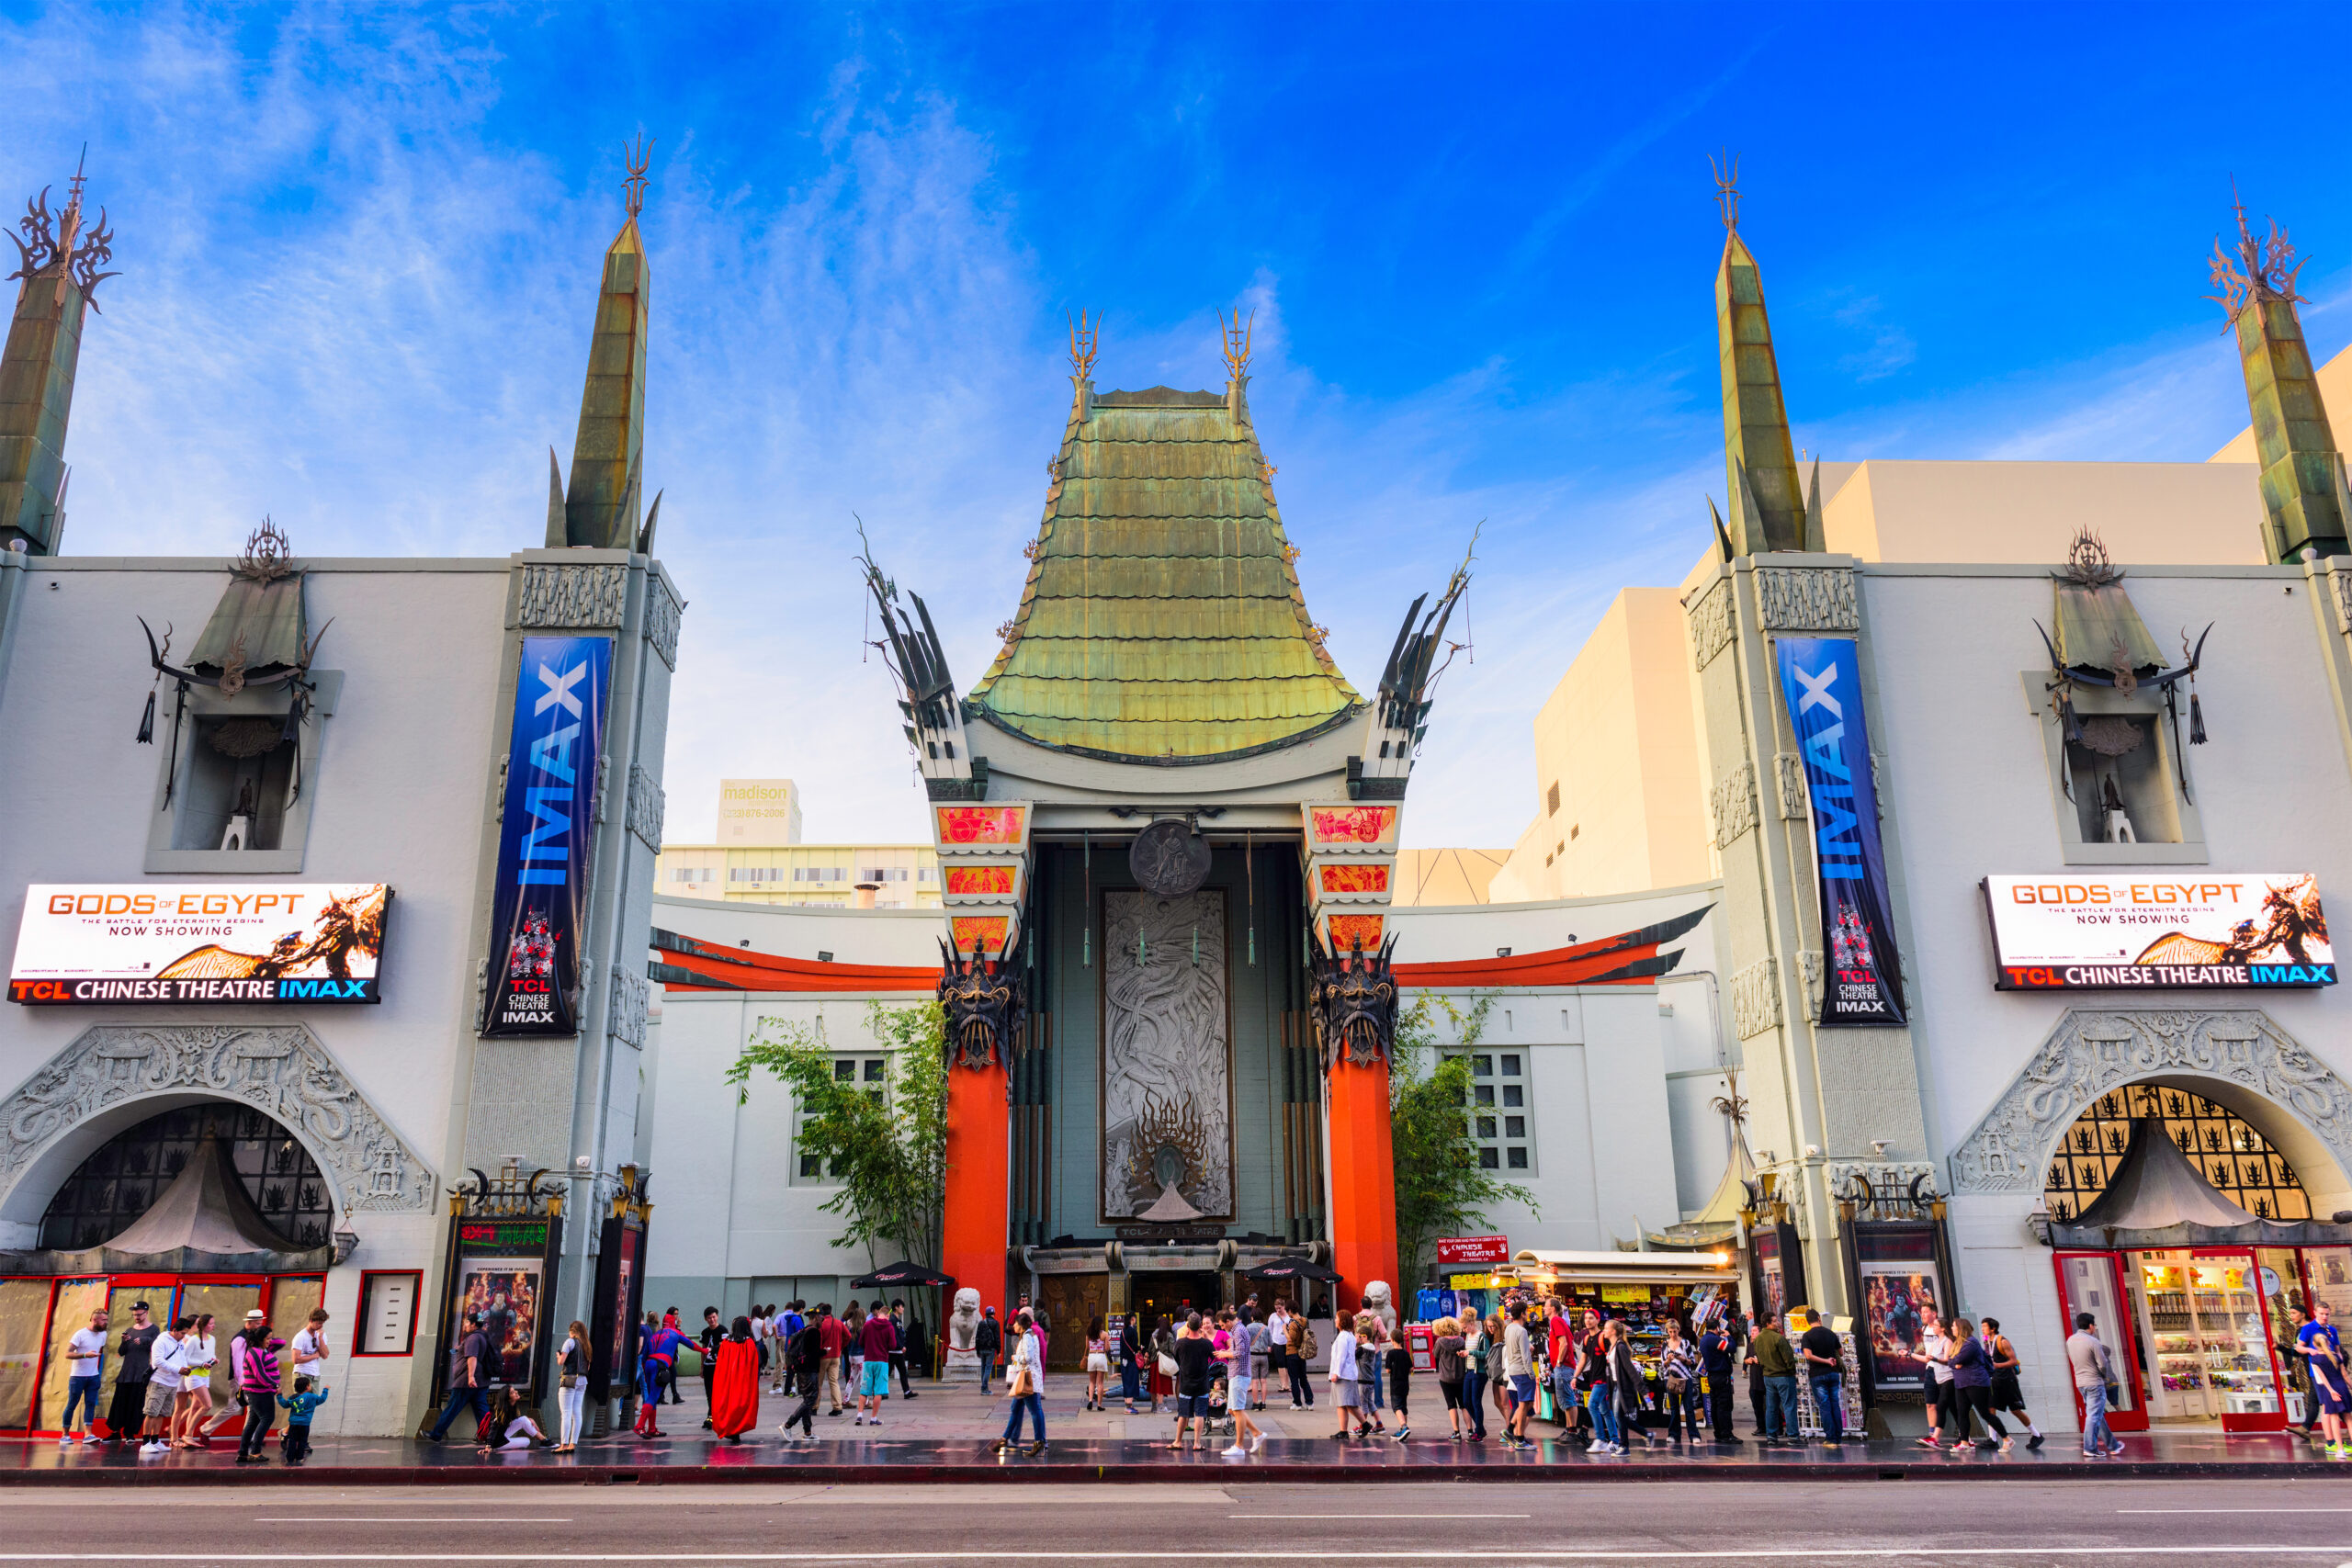 A movie theater in the city of Los Angeles